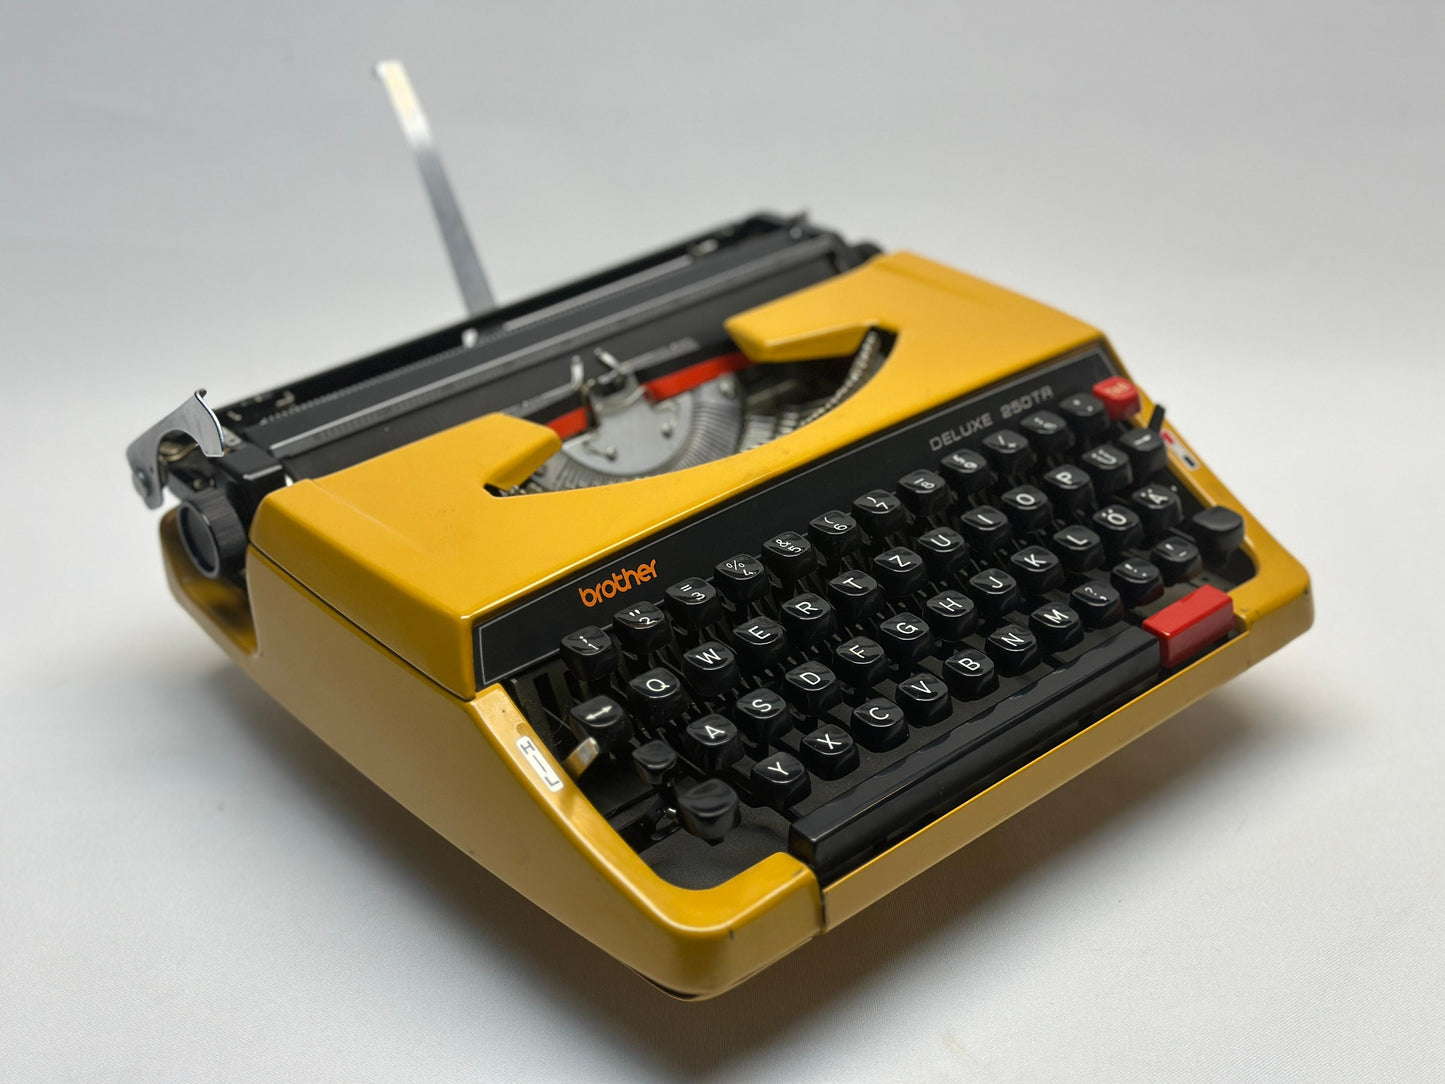 Yellow Brother Typewriter - Classic Elegance with Black Keyboard and Bag, Red Tab Key, Ideal Gift Choice